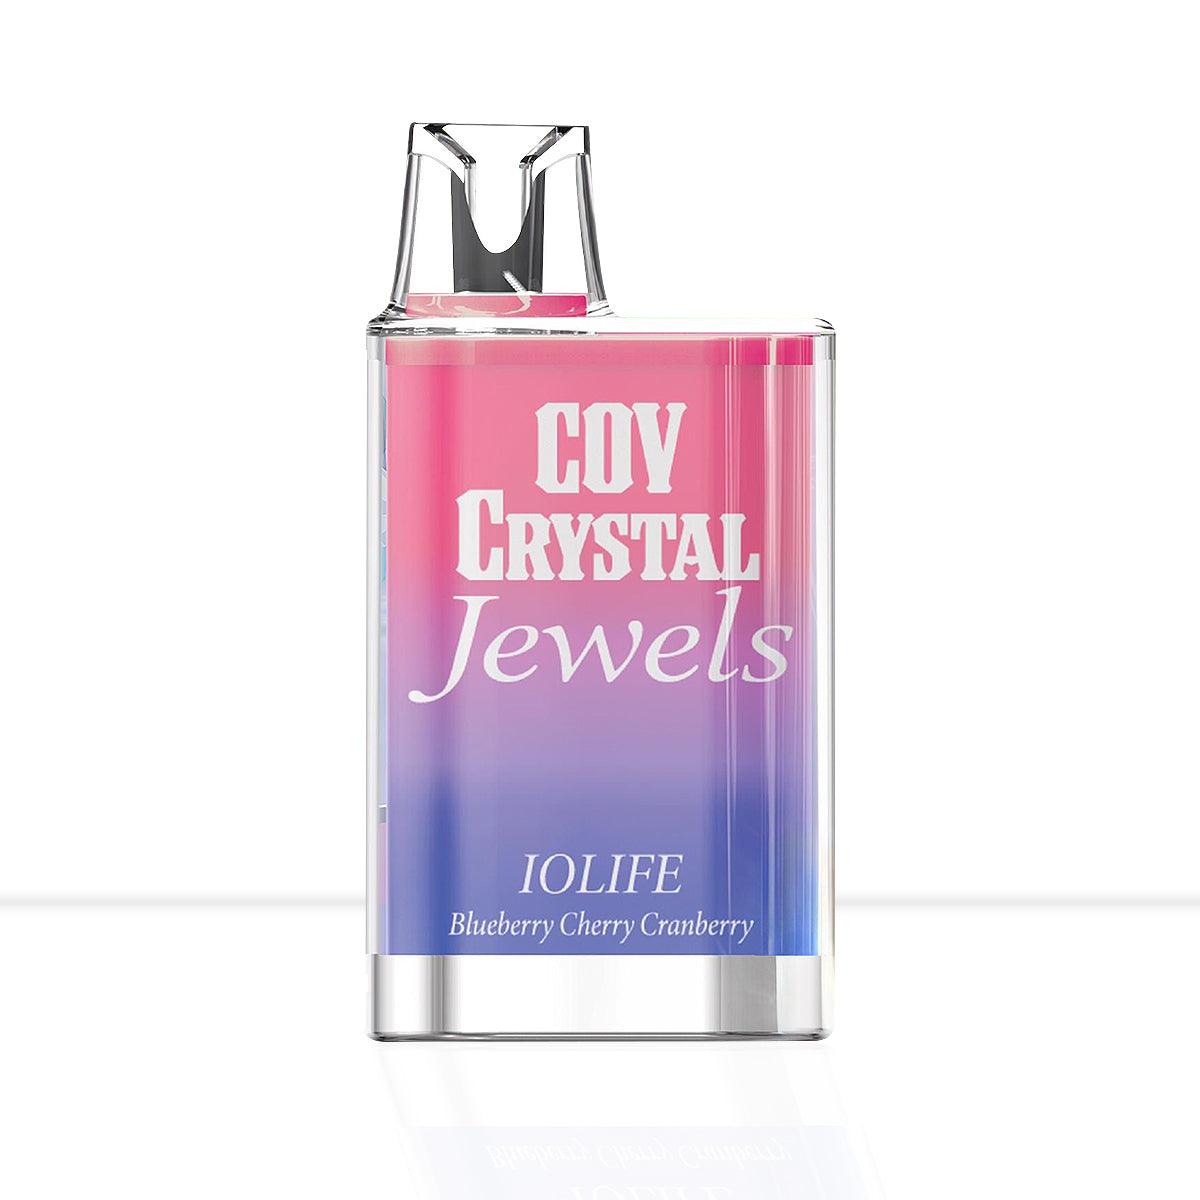 COV Crystal Jewels Blueberry Cherry Cranberry Iolife Disposable - Vape Kits